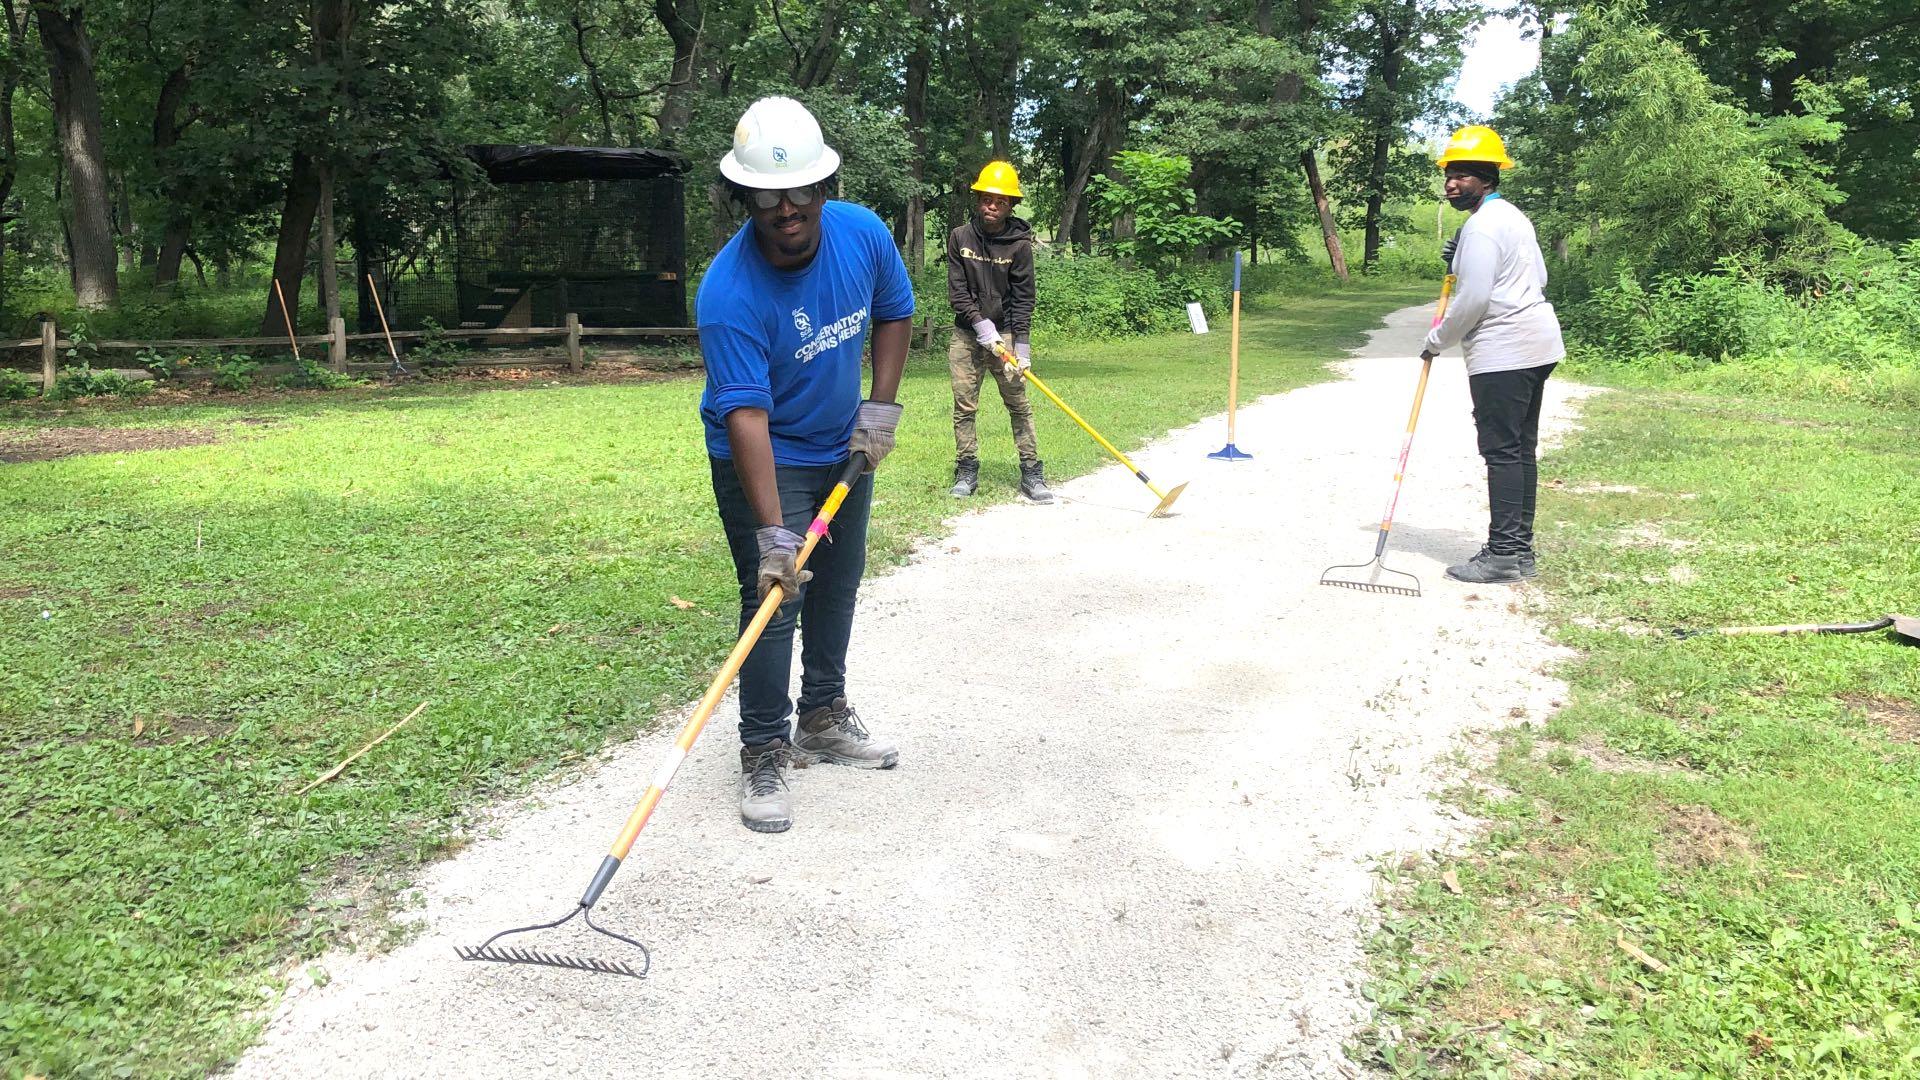 Conservation Corps members making trail improvements at Sand Ridge Nature Center, August 2022. (Patty Wetli / WTTW News)